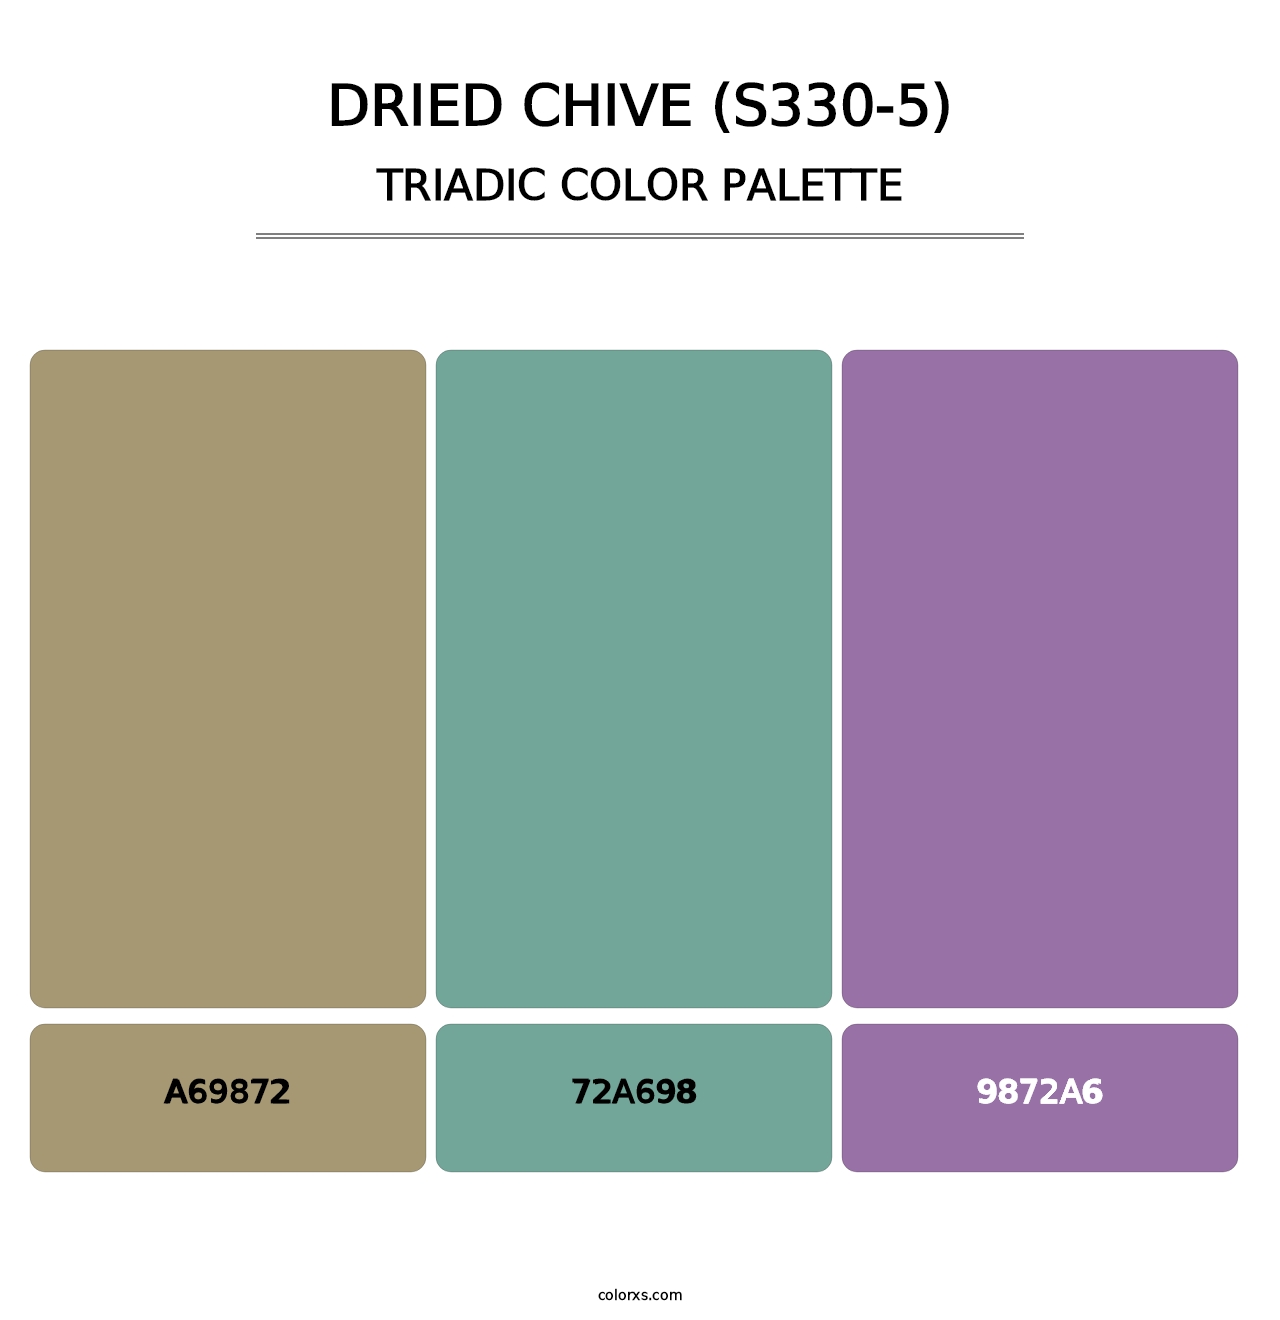 Dried Chive (S330-5) - Triadic Color Palette